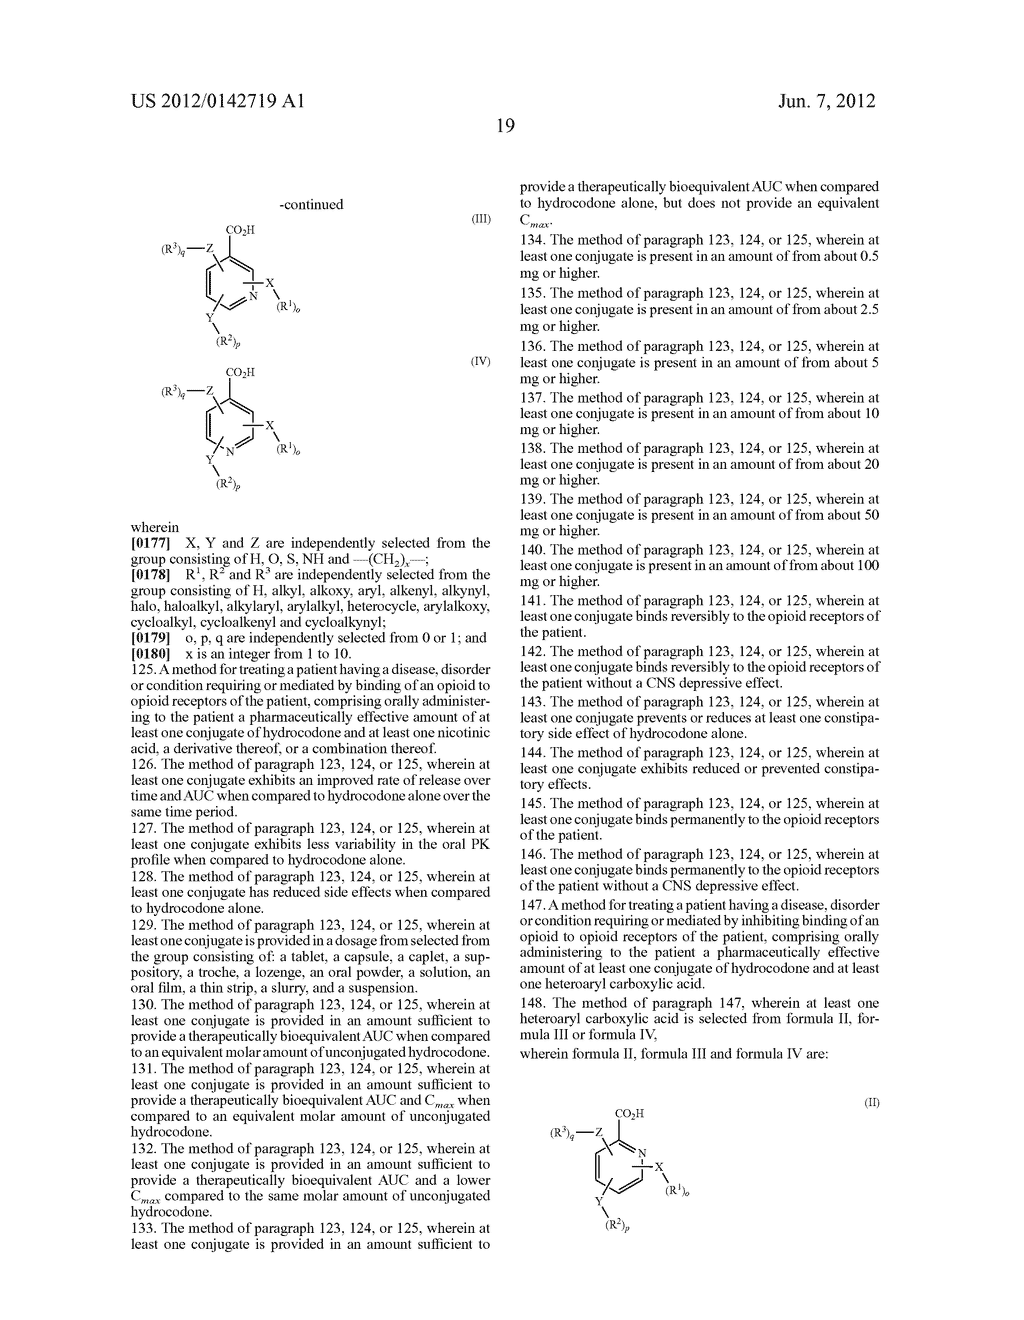 Benzoic acid, benzoic acid derivatives and heteroaryl carboxylic acid     conjugates of hydrocodone, prodrugs, methods of making and use thereof - diagram, schematic, and image 35